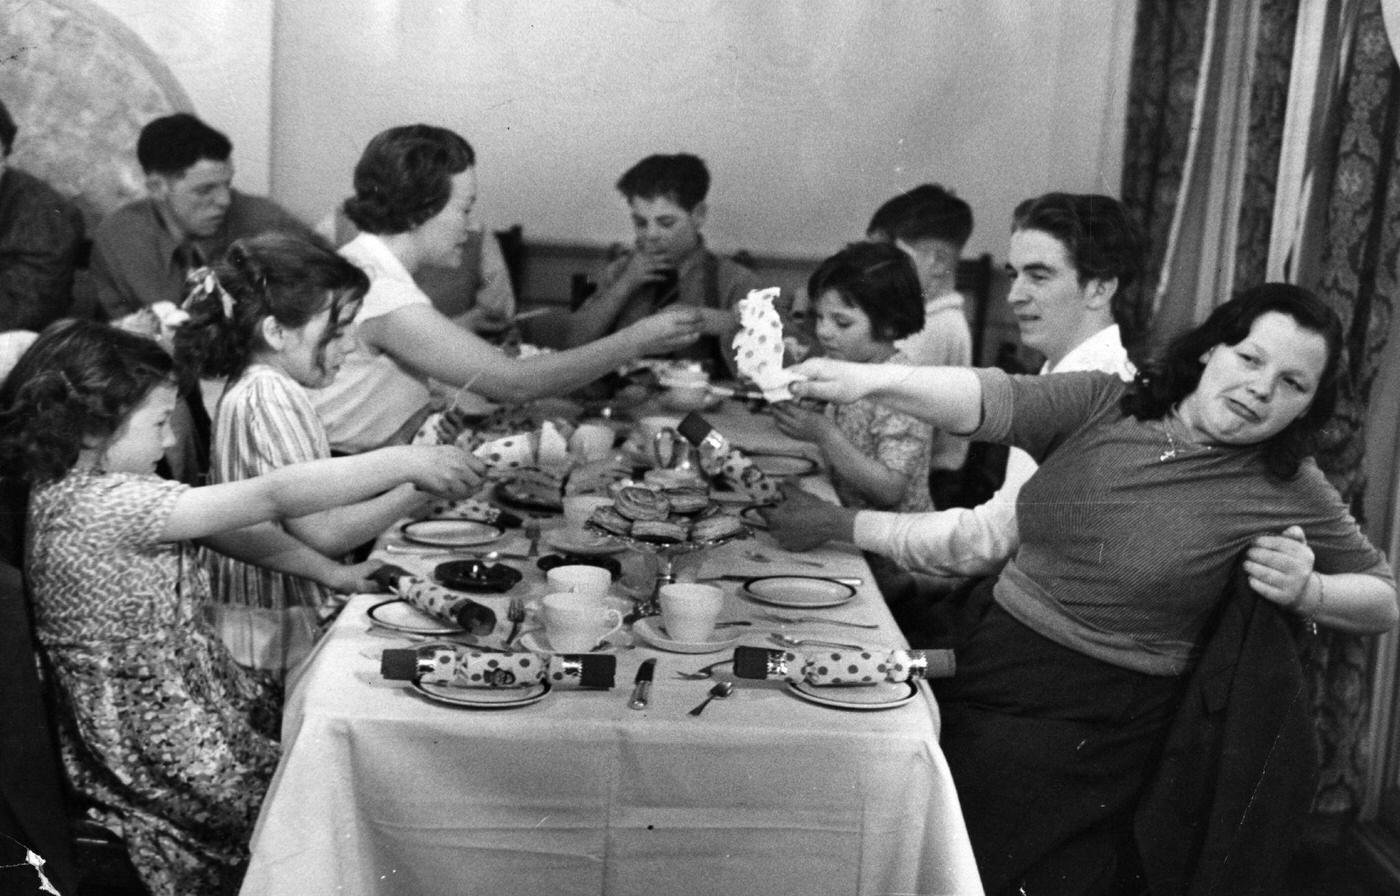 Some of the Hudson family's twenty children enjoying themselves at a Christmas lunch in Selfridges department store, London.